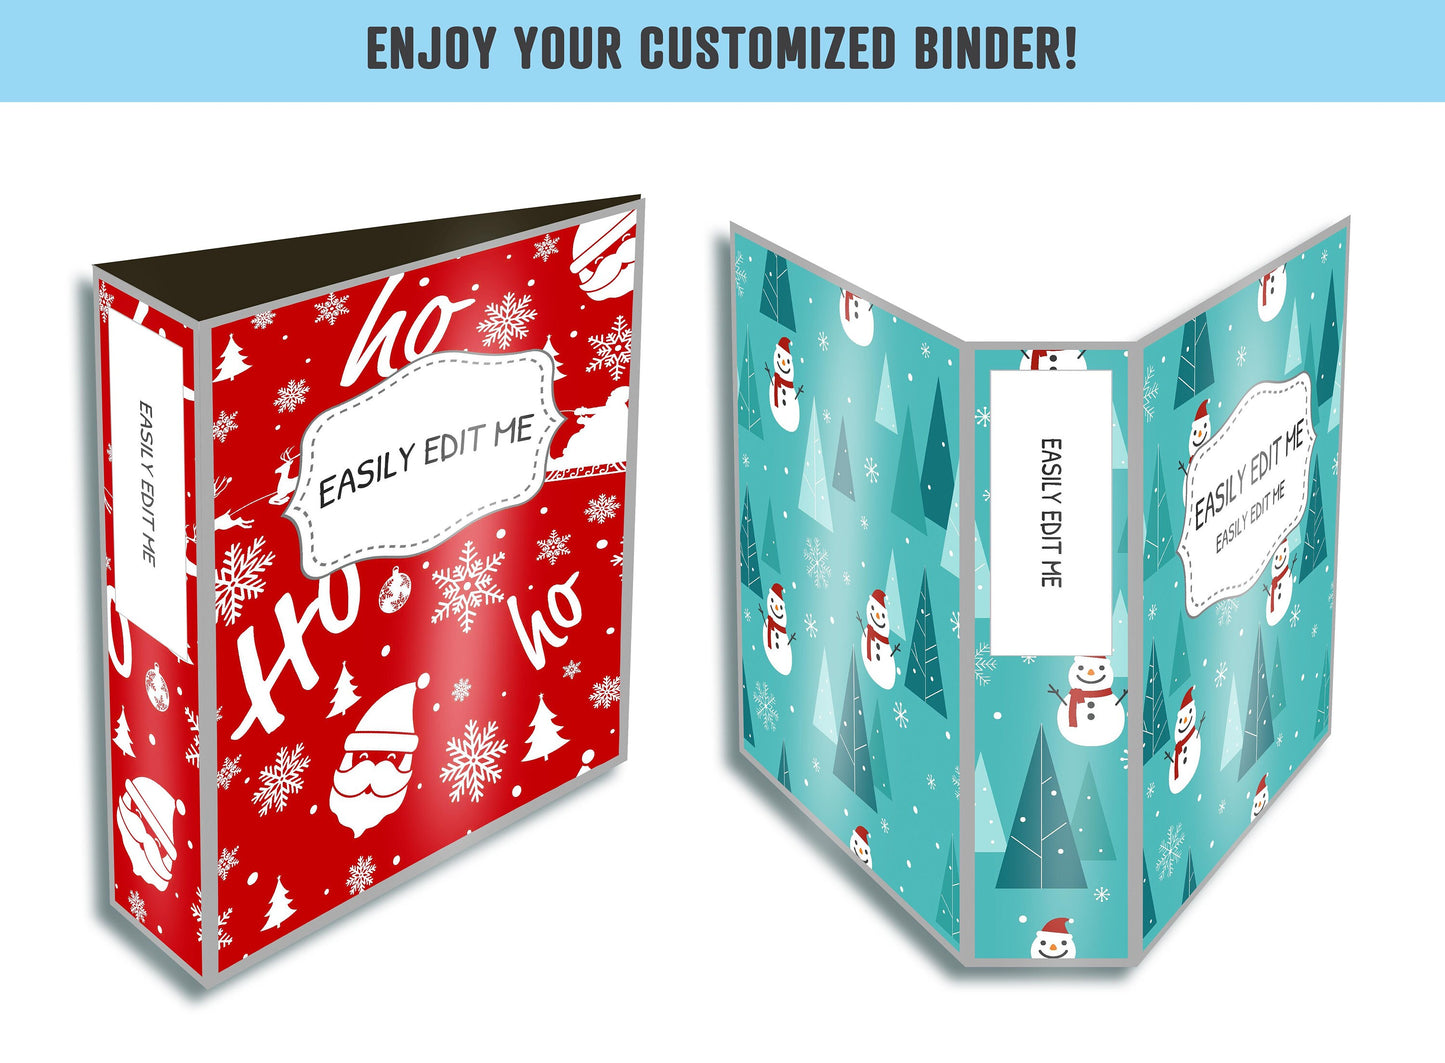 Christmas, Snowman, Santa Claus, Snowflakes, Winter Binder Cover, 10 Printable & Editable Binder Covers + Spines, Holiday Planner Template